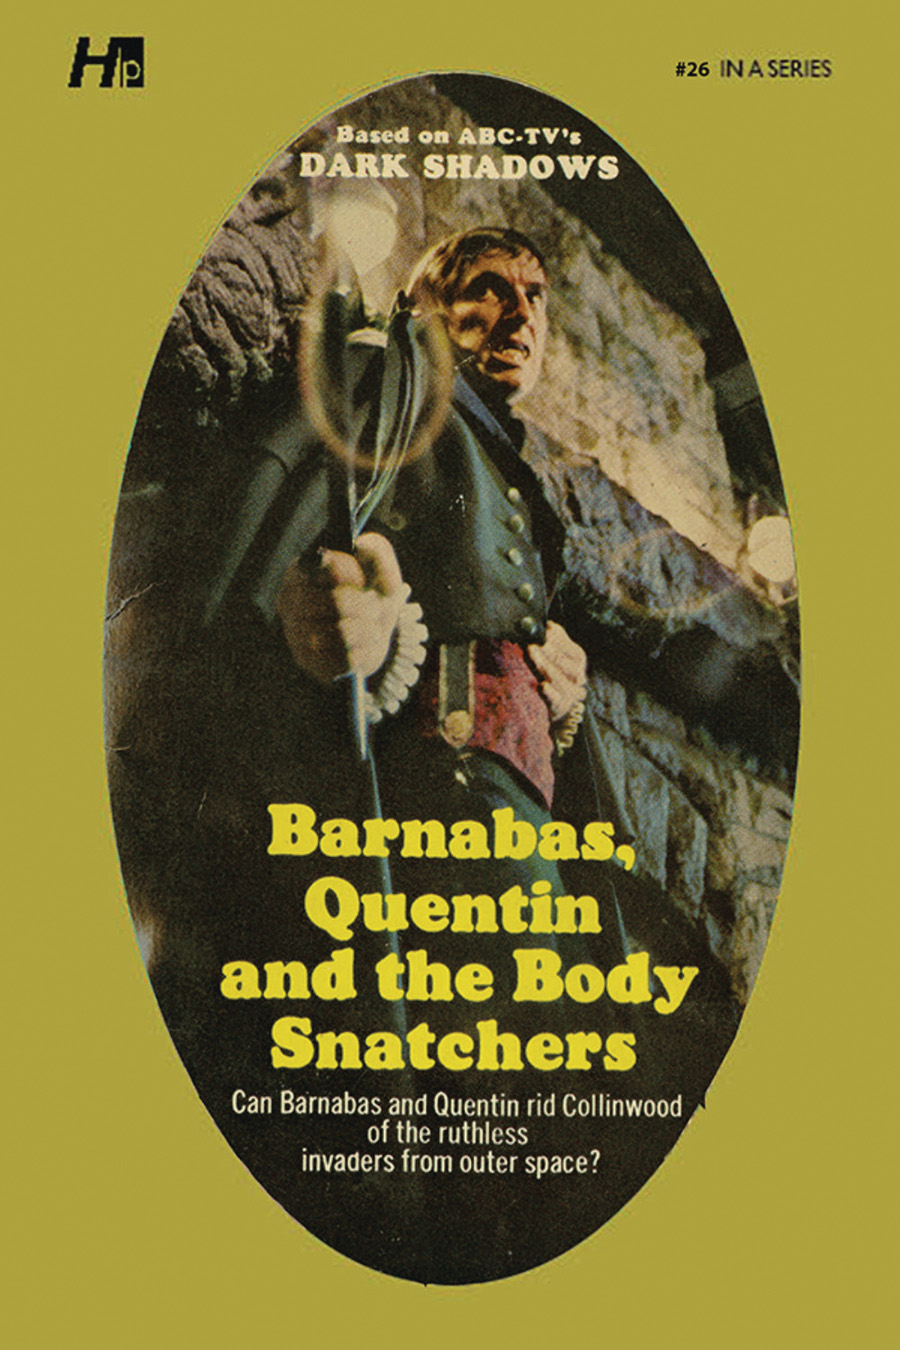 Dark Shadows Paperback Library Novel Vol 26 Barnabas Quentin And The Body Snatchers TP